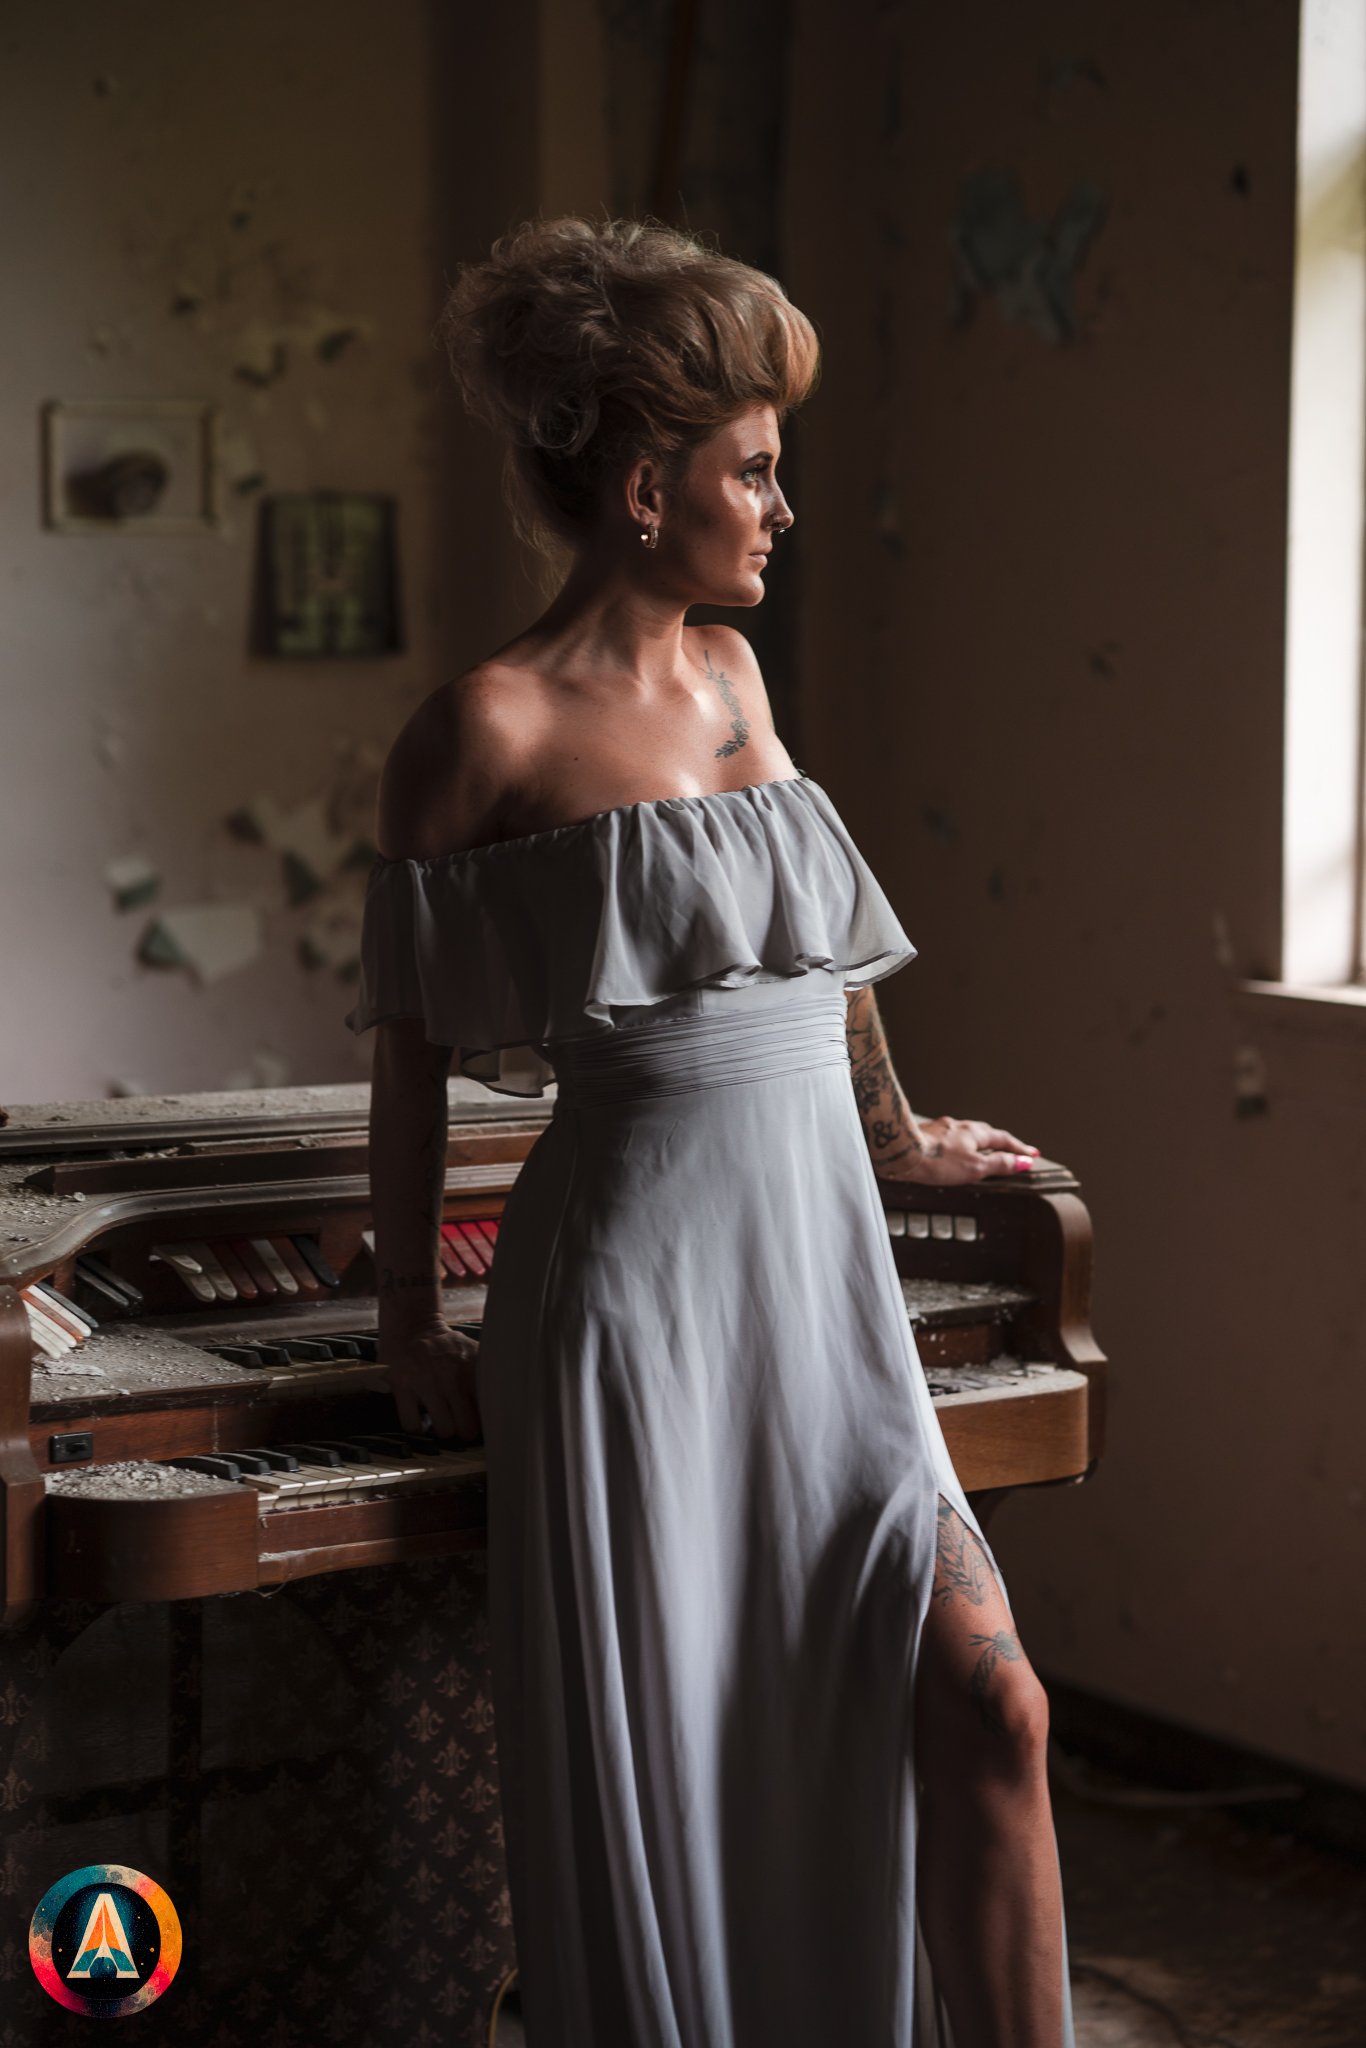 Blonde model courtney france poses in the haunted indiana state sanitarium shop / hair salon in a elegant blue dress.